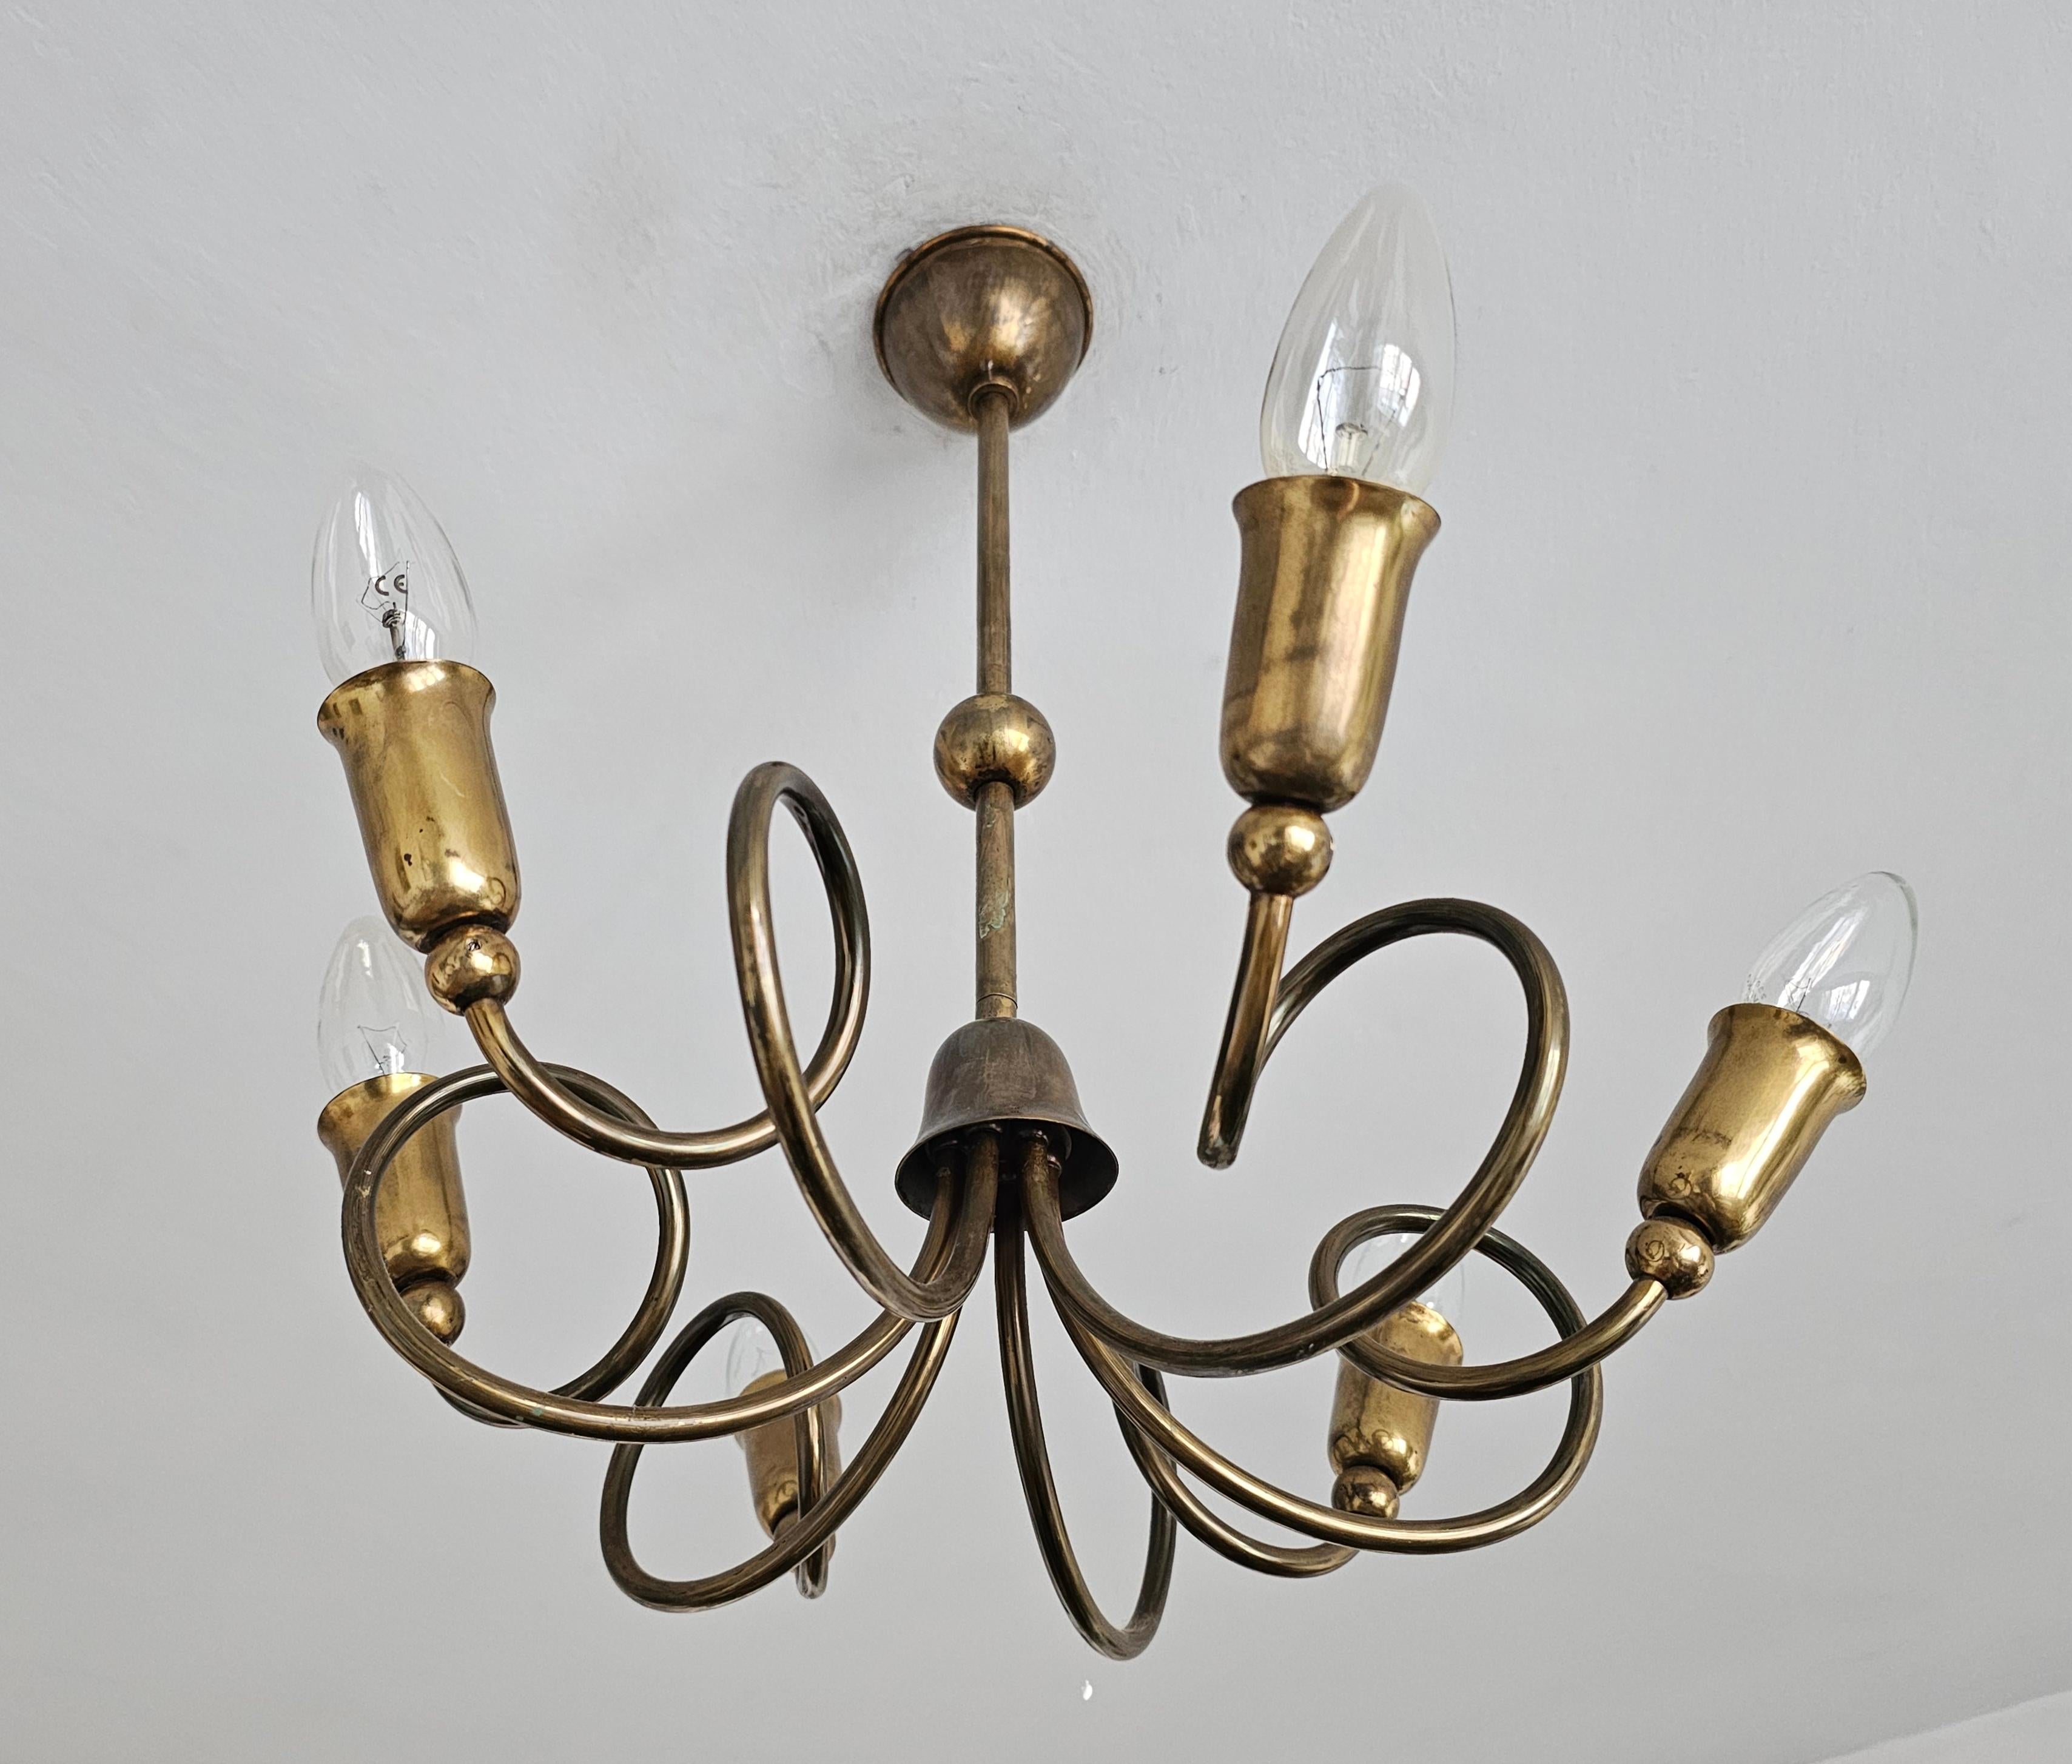 In this listing you will find a very unusual Mid Century Modern 6-Arm Sputnik Chandelier. It features twisted brass arms to which the lights are attached. The chandelier is designed in style of renowned Italian lighting company Stilnovo. Made in